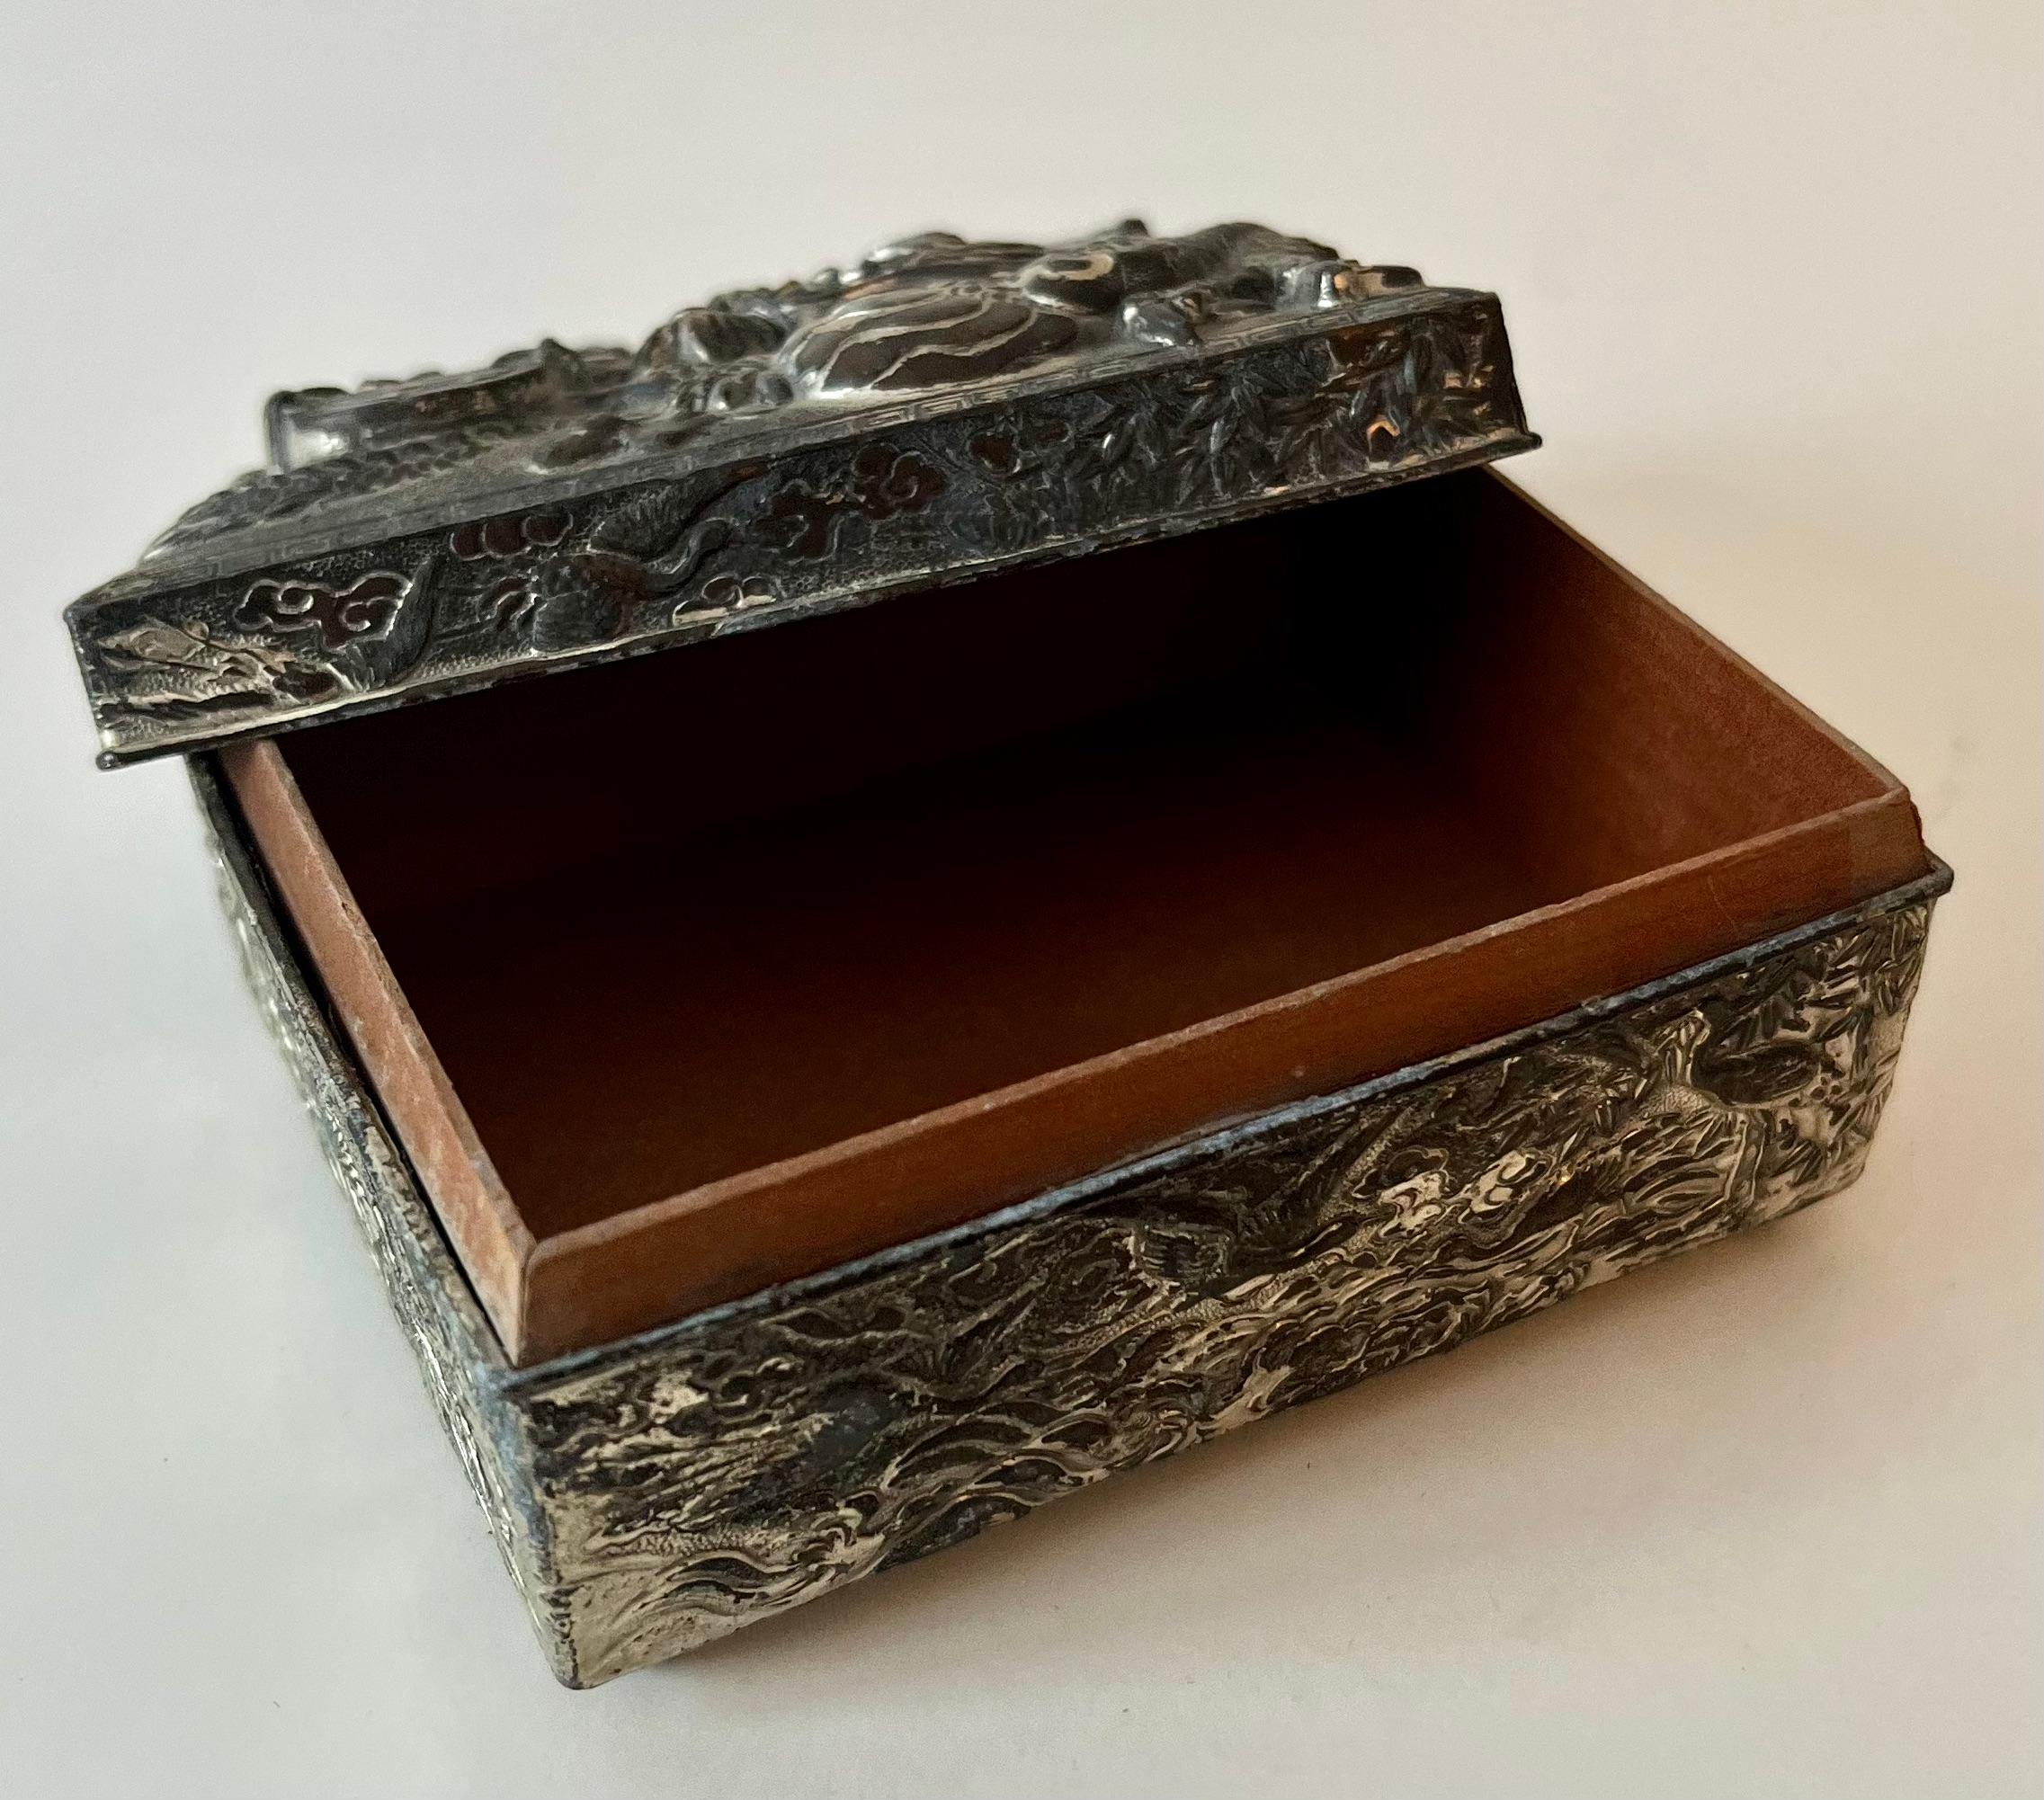 Asian Repousse Lidded box with Wooden Interior For Sale 2